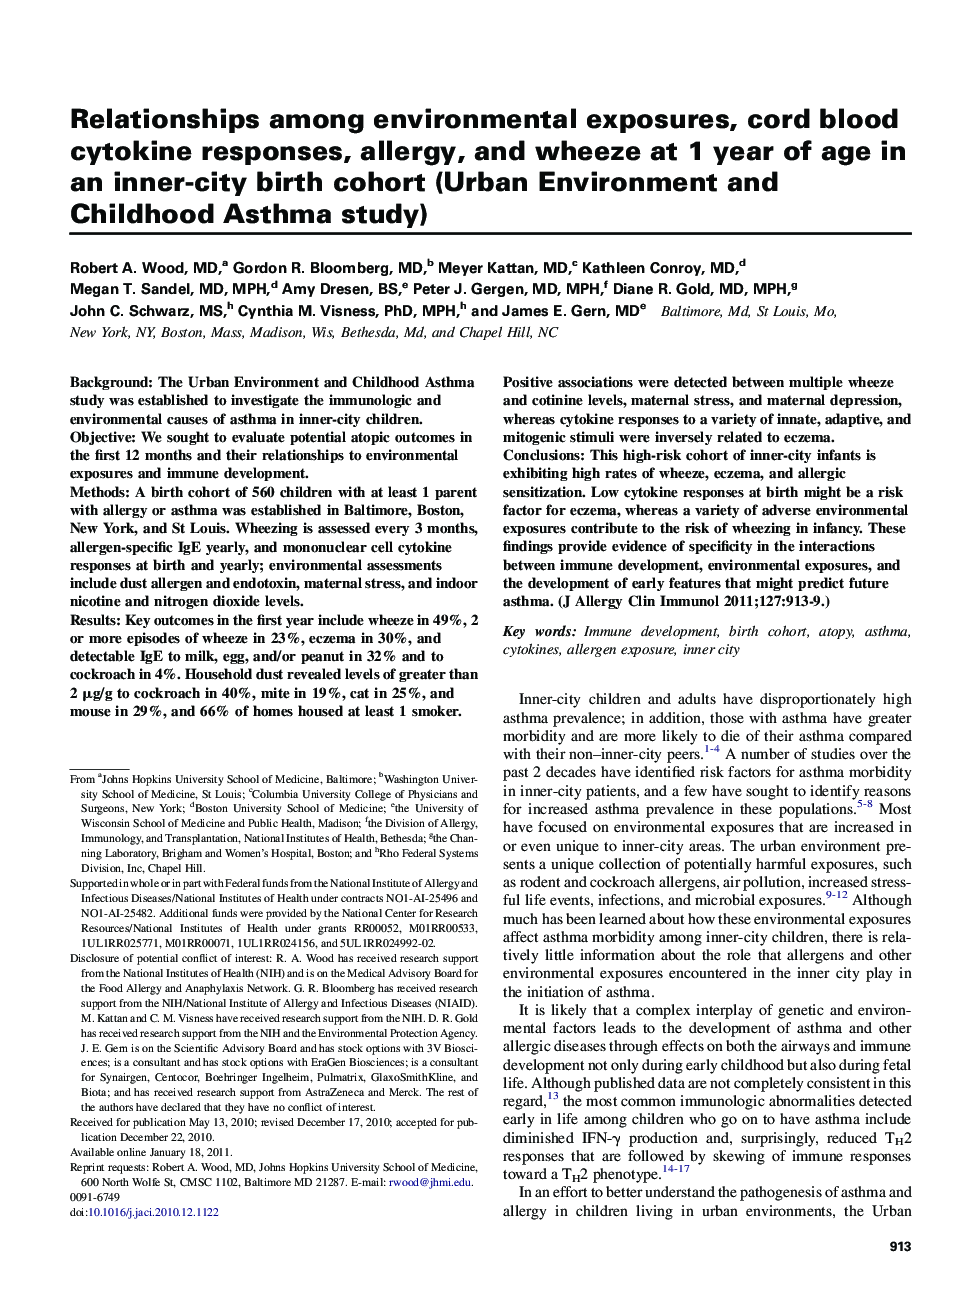 Relationships among environmental exposures, cord blood cytokine responses, allergy, and wheeze at 1 year of age in an inner-city birth cohort (Urban Environment and Childhood Asthma study)